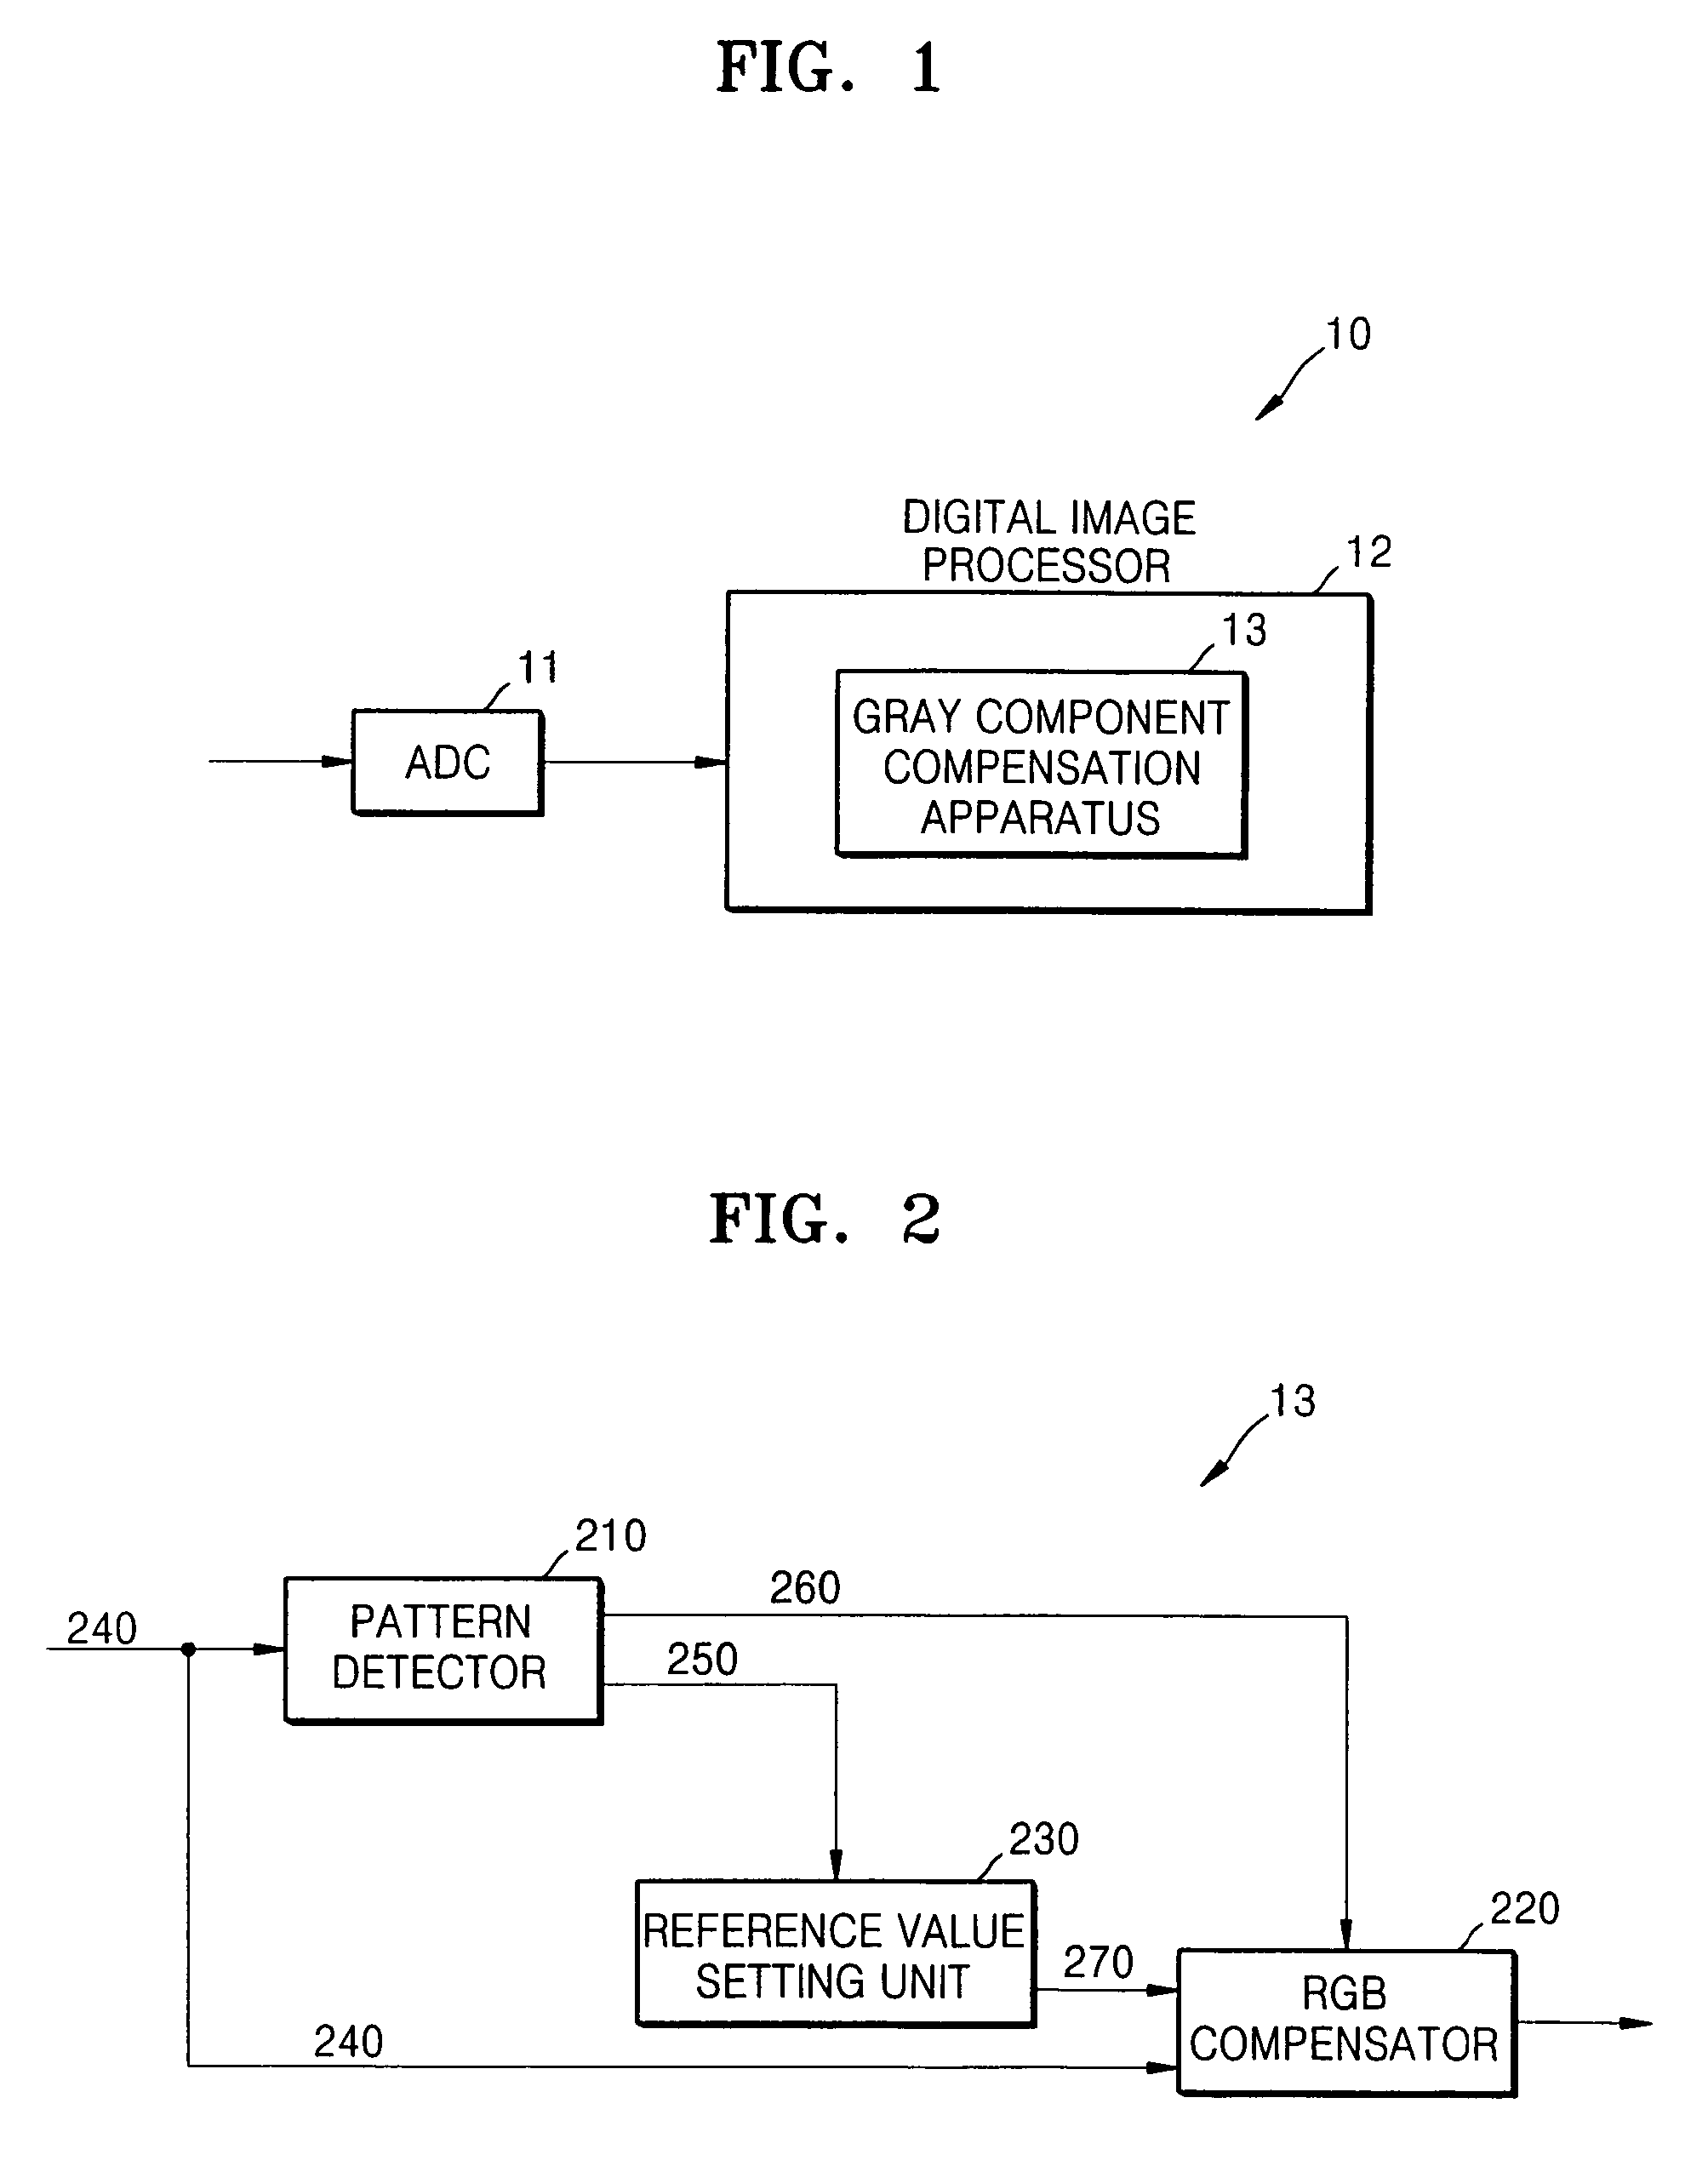 Apparatus for compensating for gray component of image signal